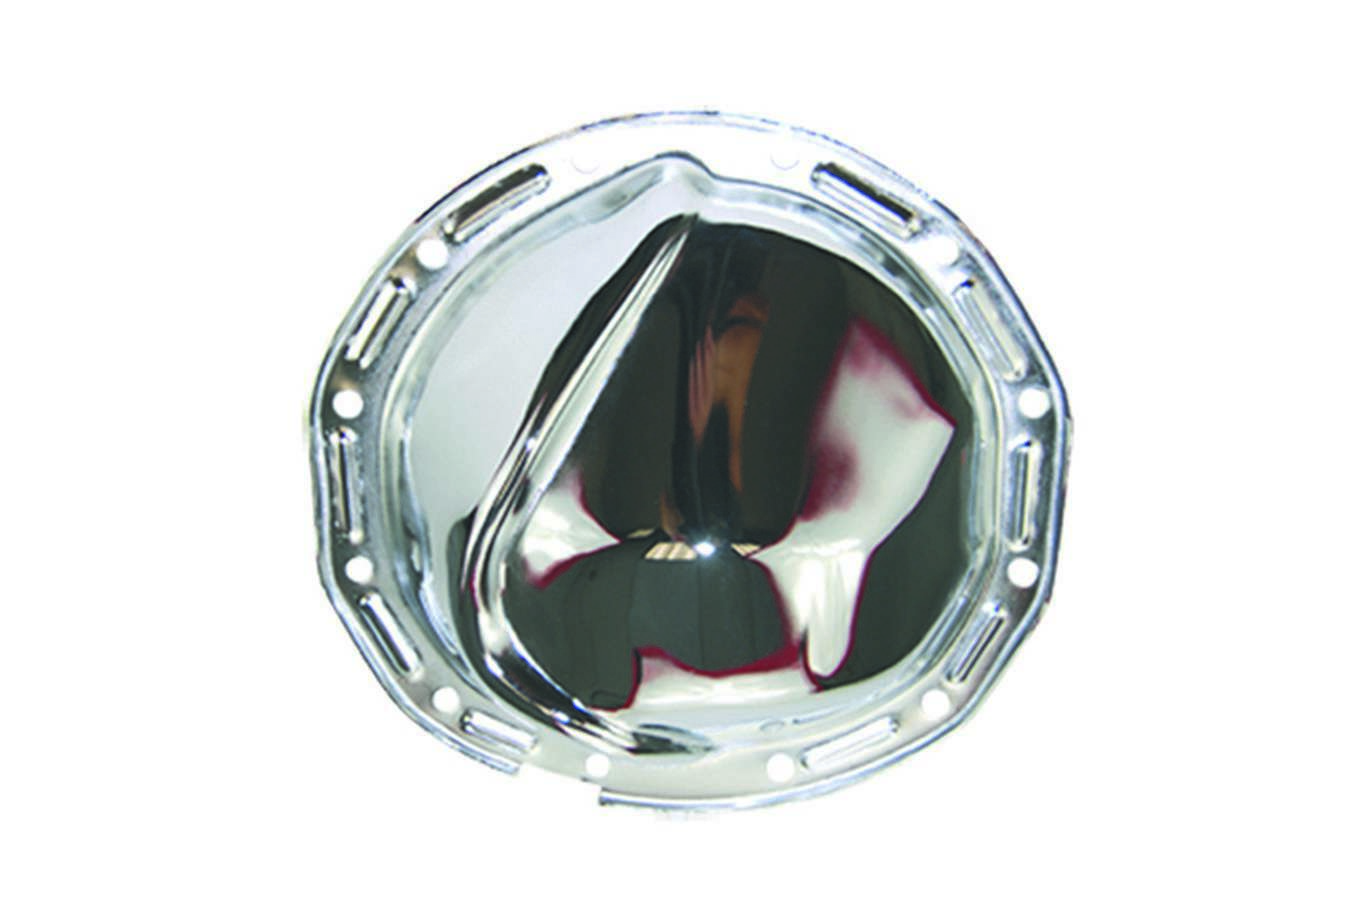 Specialty Products 7126 Differential Cover, Steel, Chrome, Passenger Car, GM 12-Bolt, Each